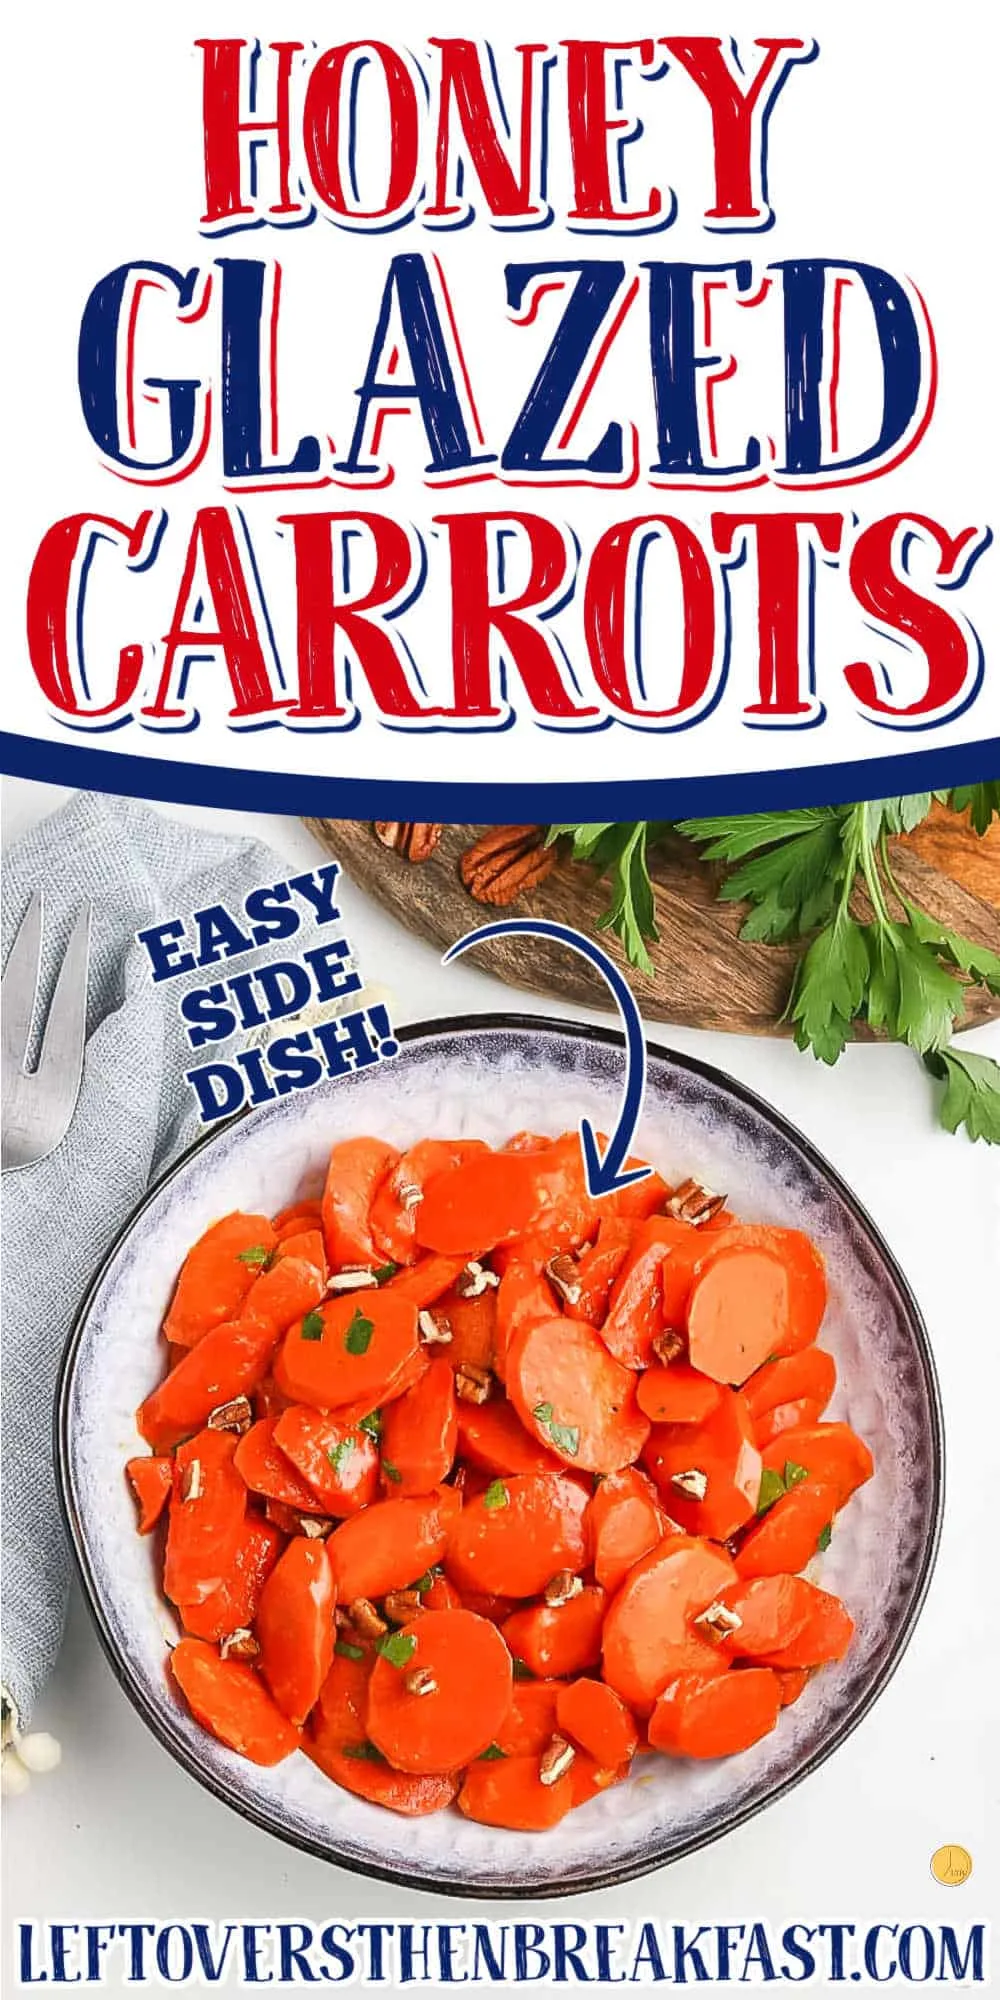 bowl of carrots with text "brown sugar glazed carrots